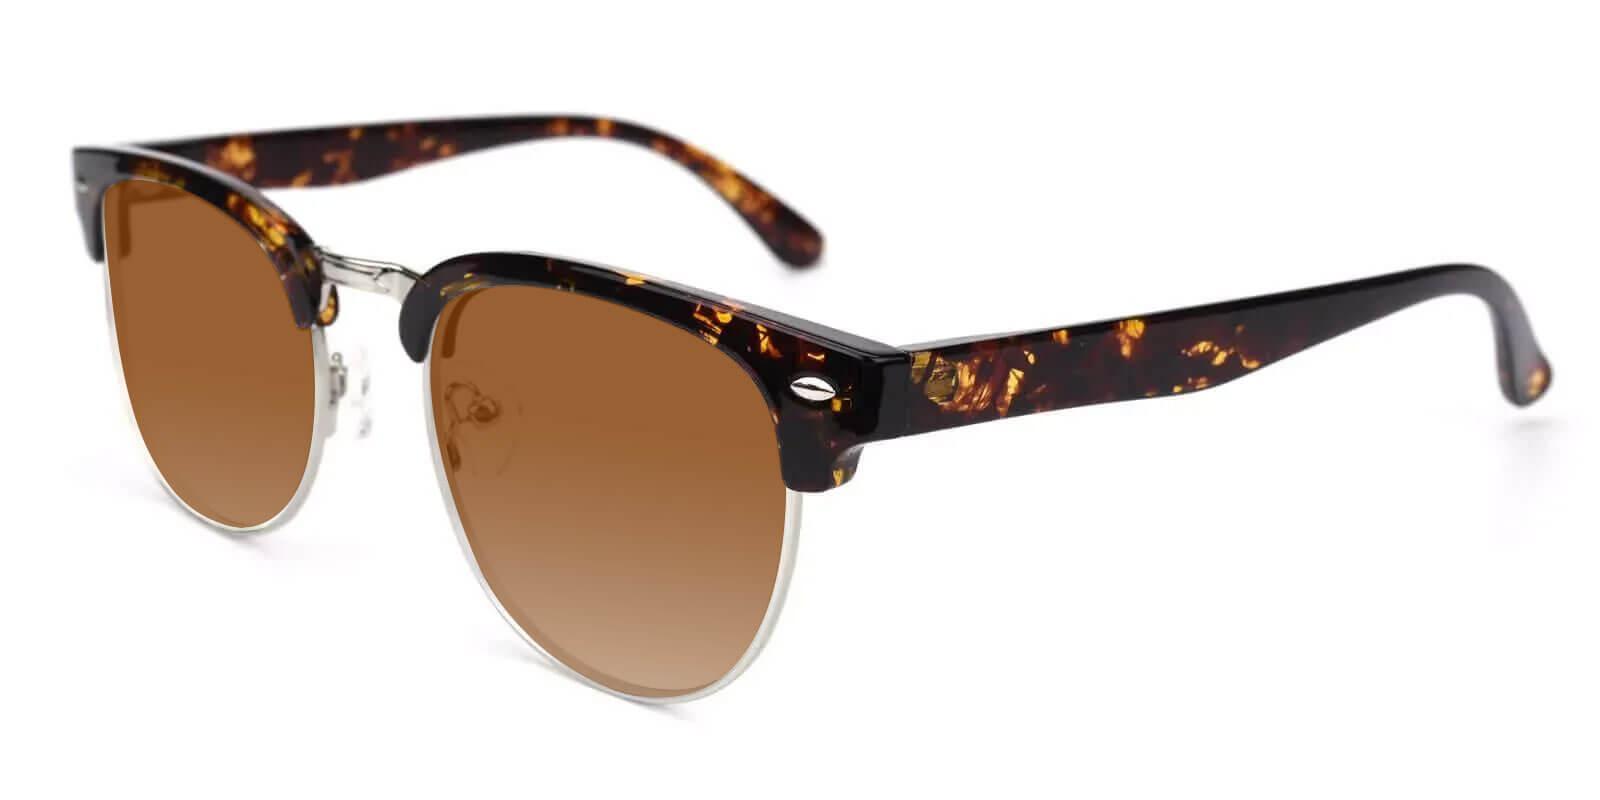 Giveny Pattern TR NosePads , Sunglasses Frames from ABBE Glasses